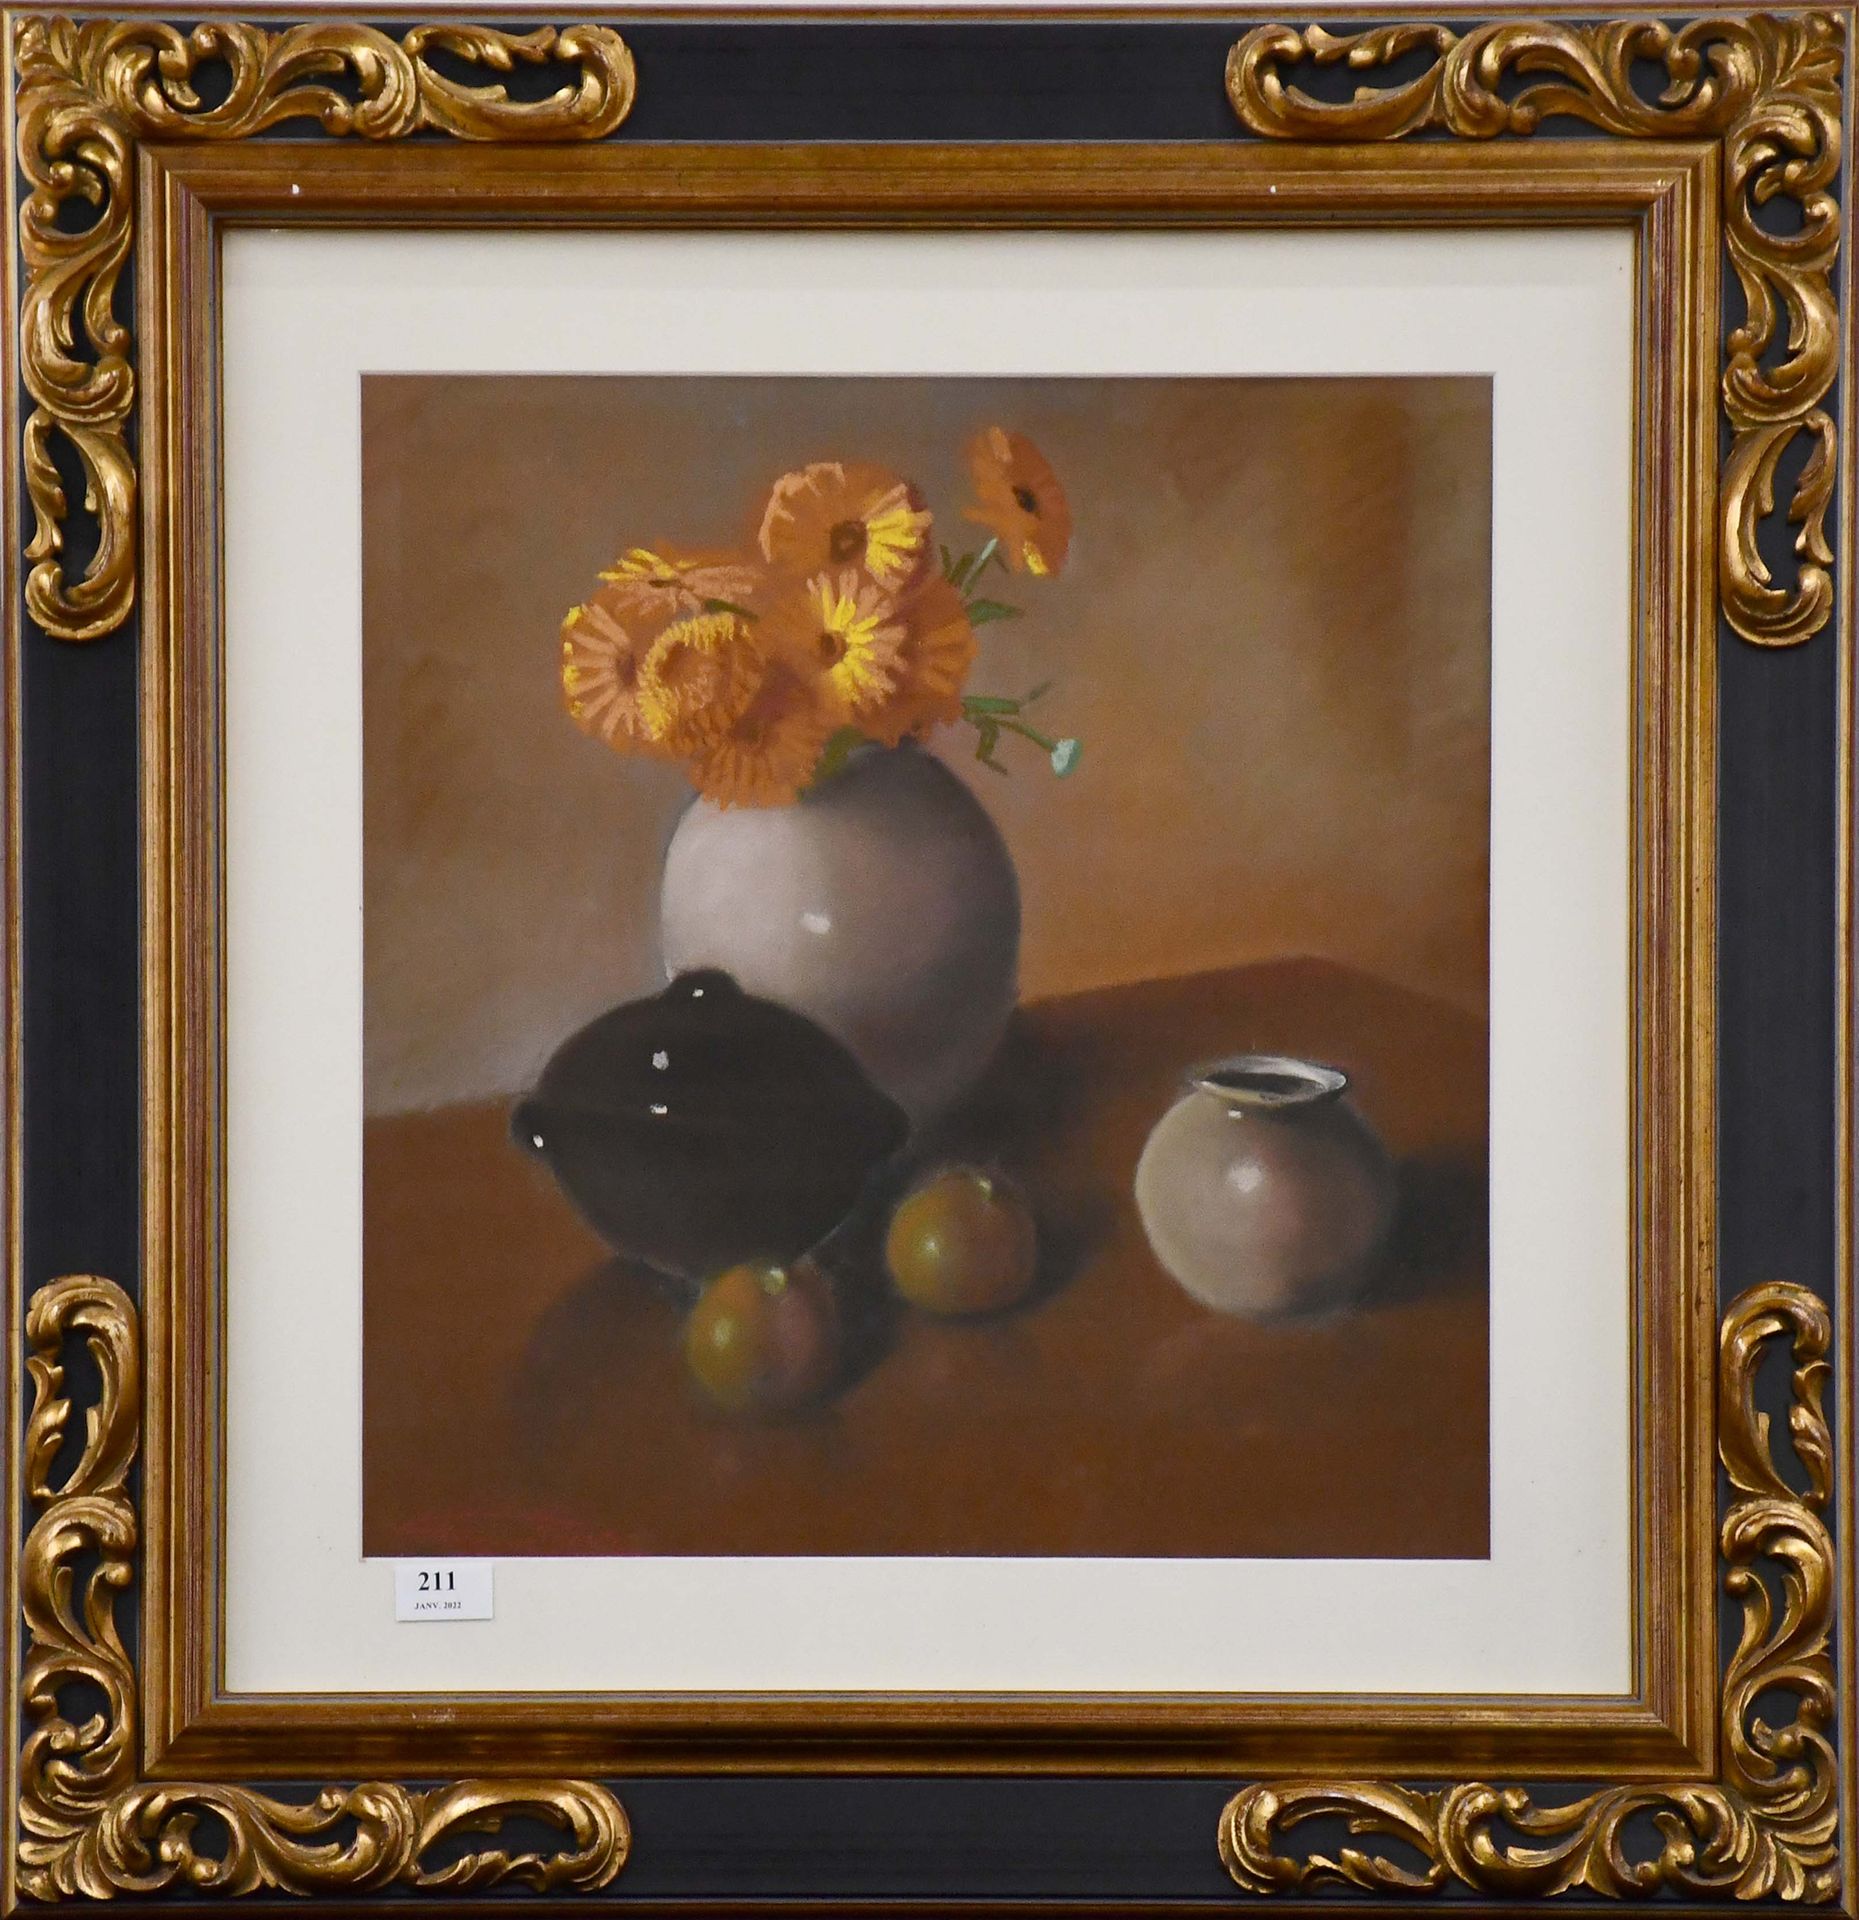 Null Firmin Baes

Pastel : "Still life". Signed.

Size : 46 cm x 44 cm.